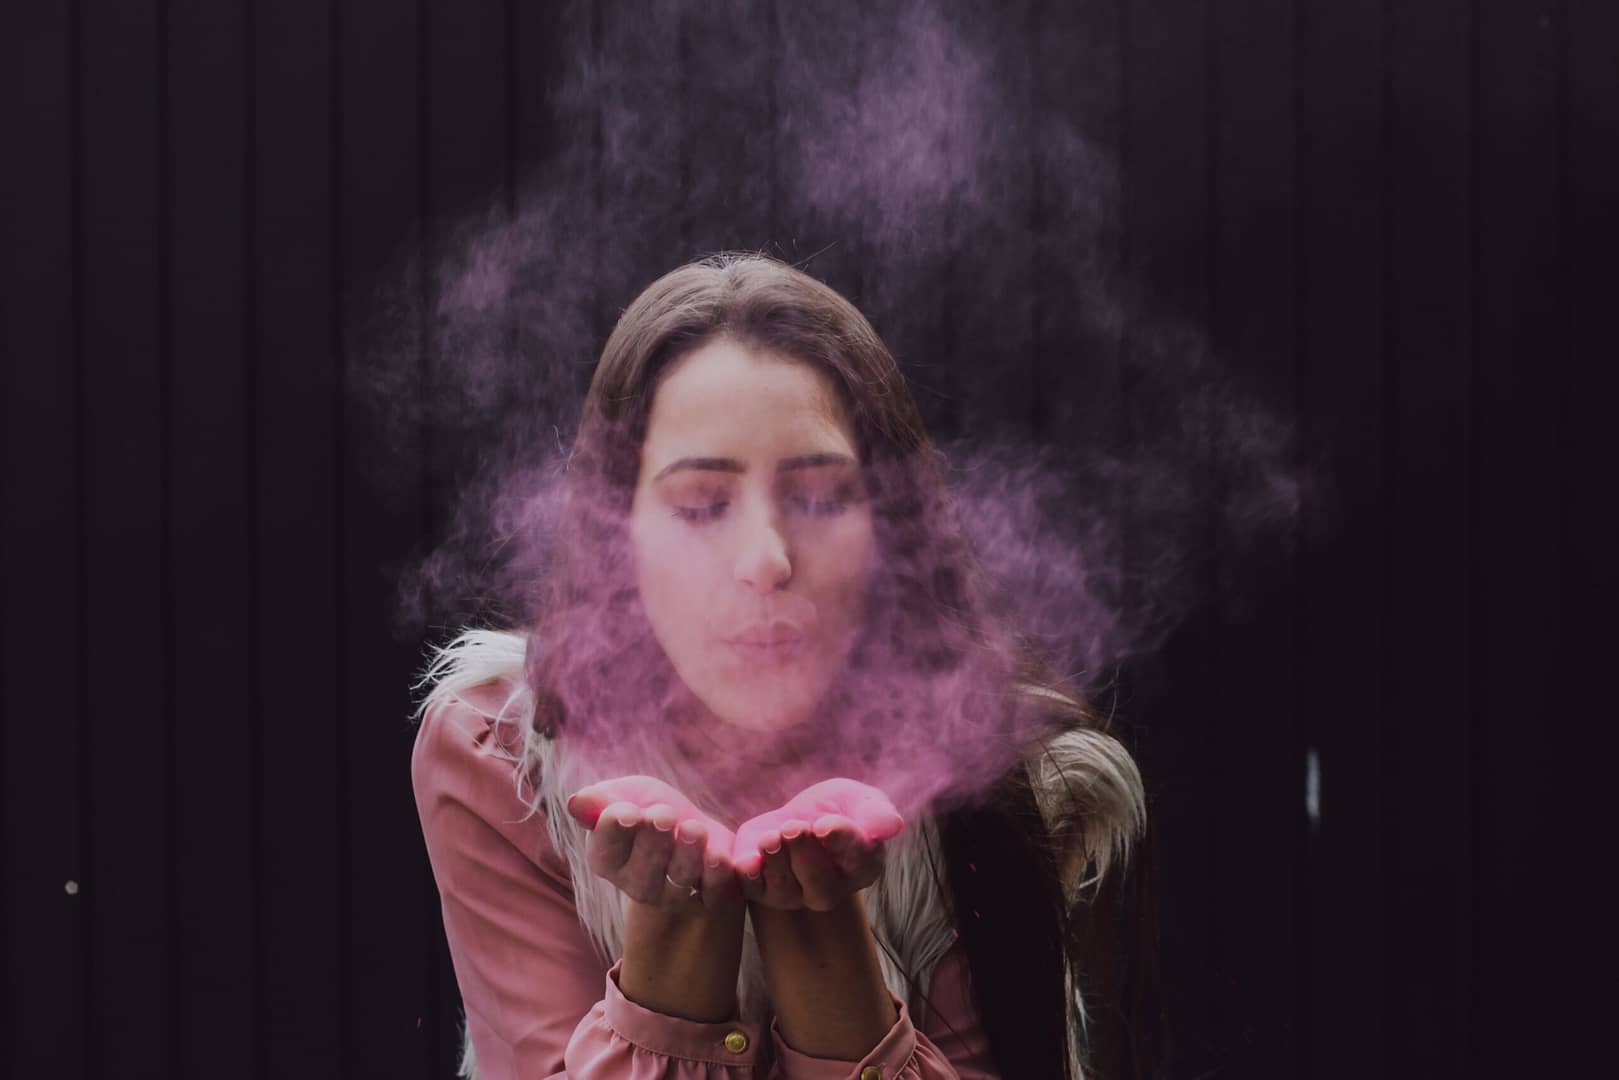 woman blowing smoke on her both hands